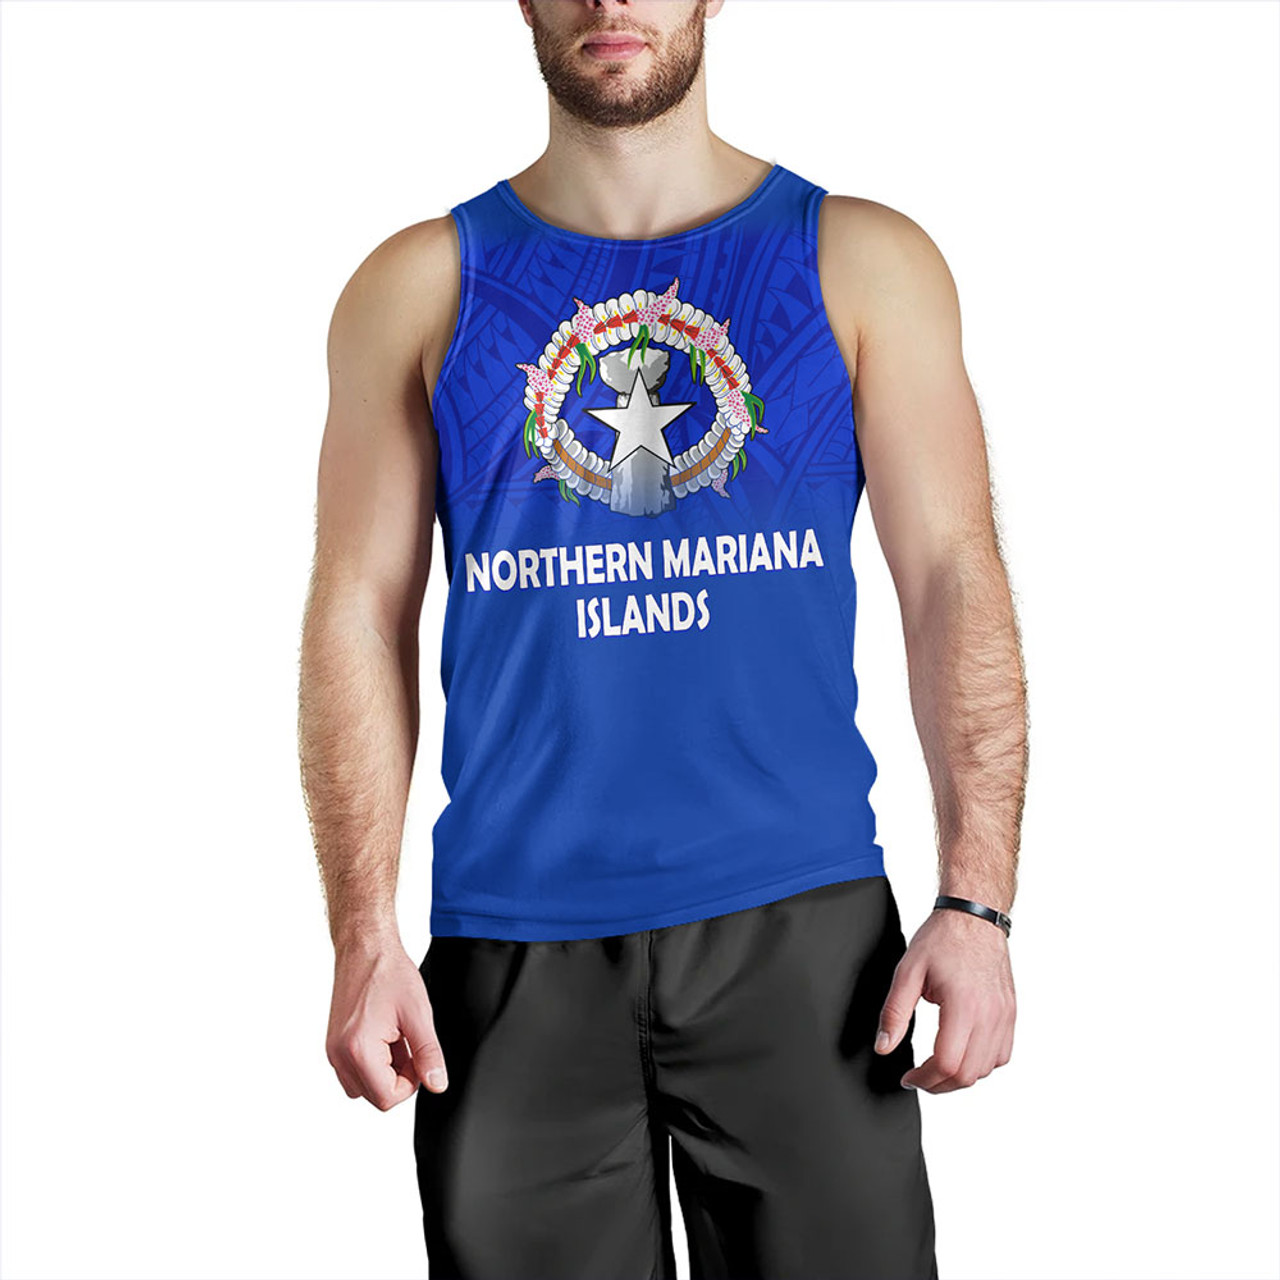 Northern Mariana Islands Tank Top - Flag Color With Traditional Patterns